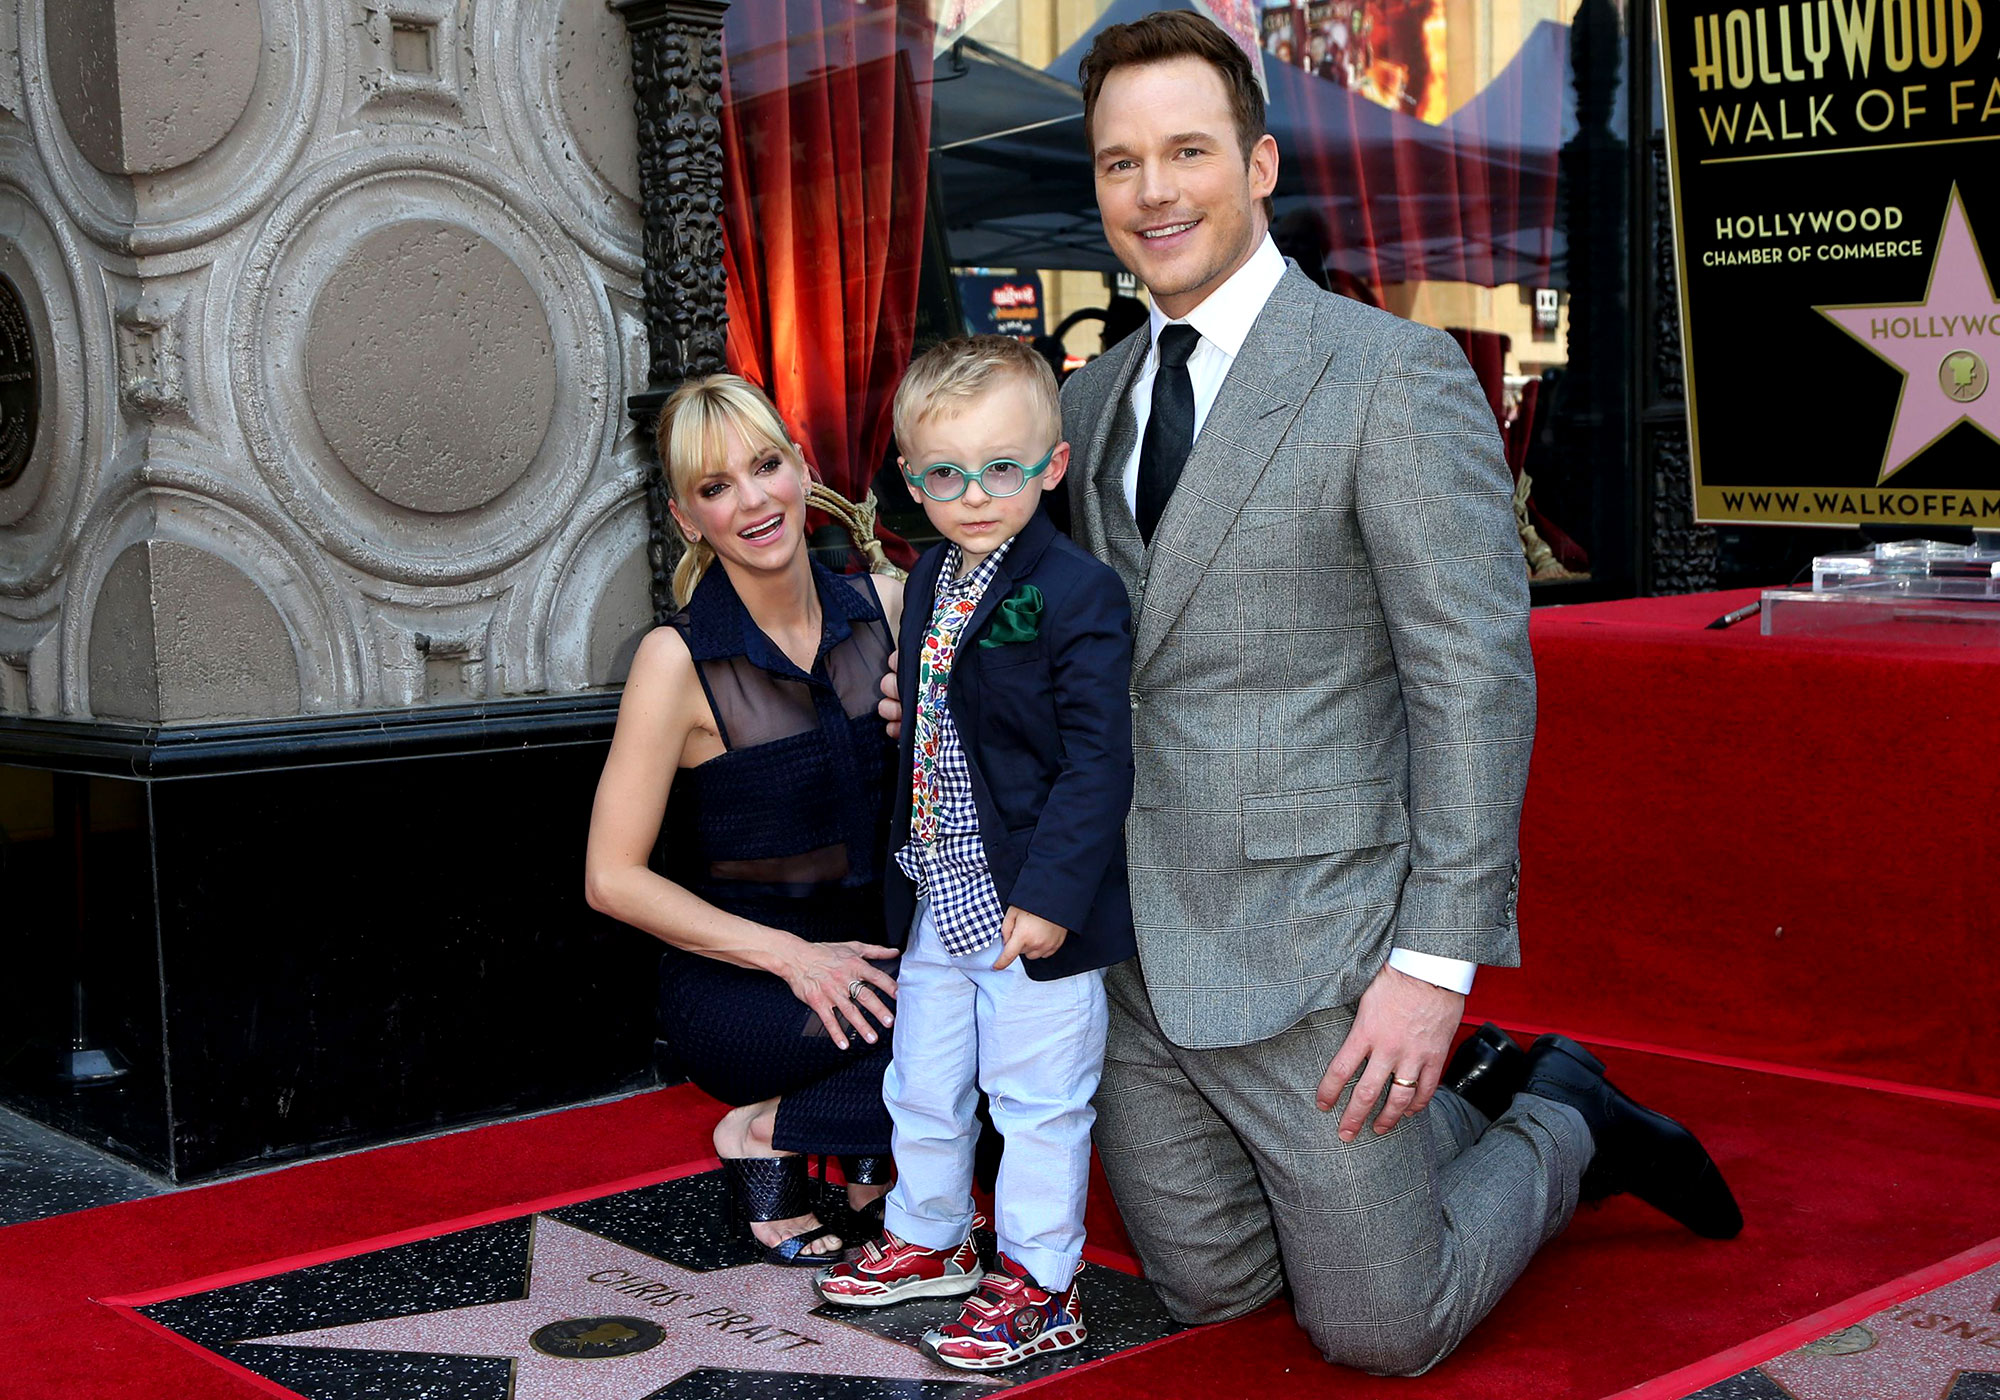 Chris Pratt wants to know how long you should keep your kids